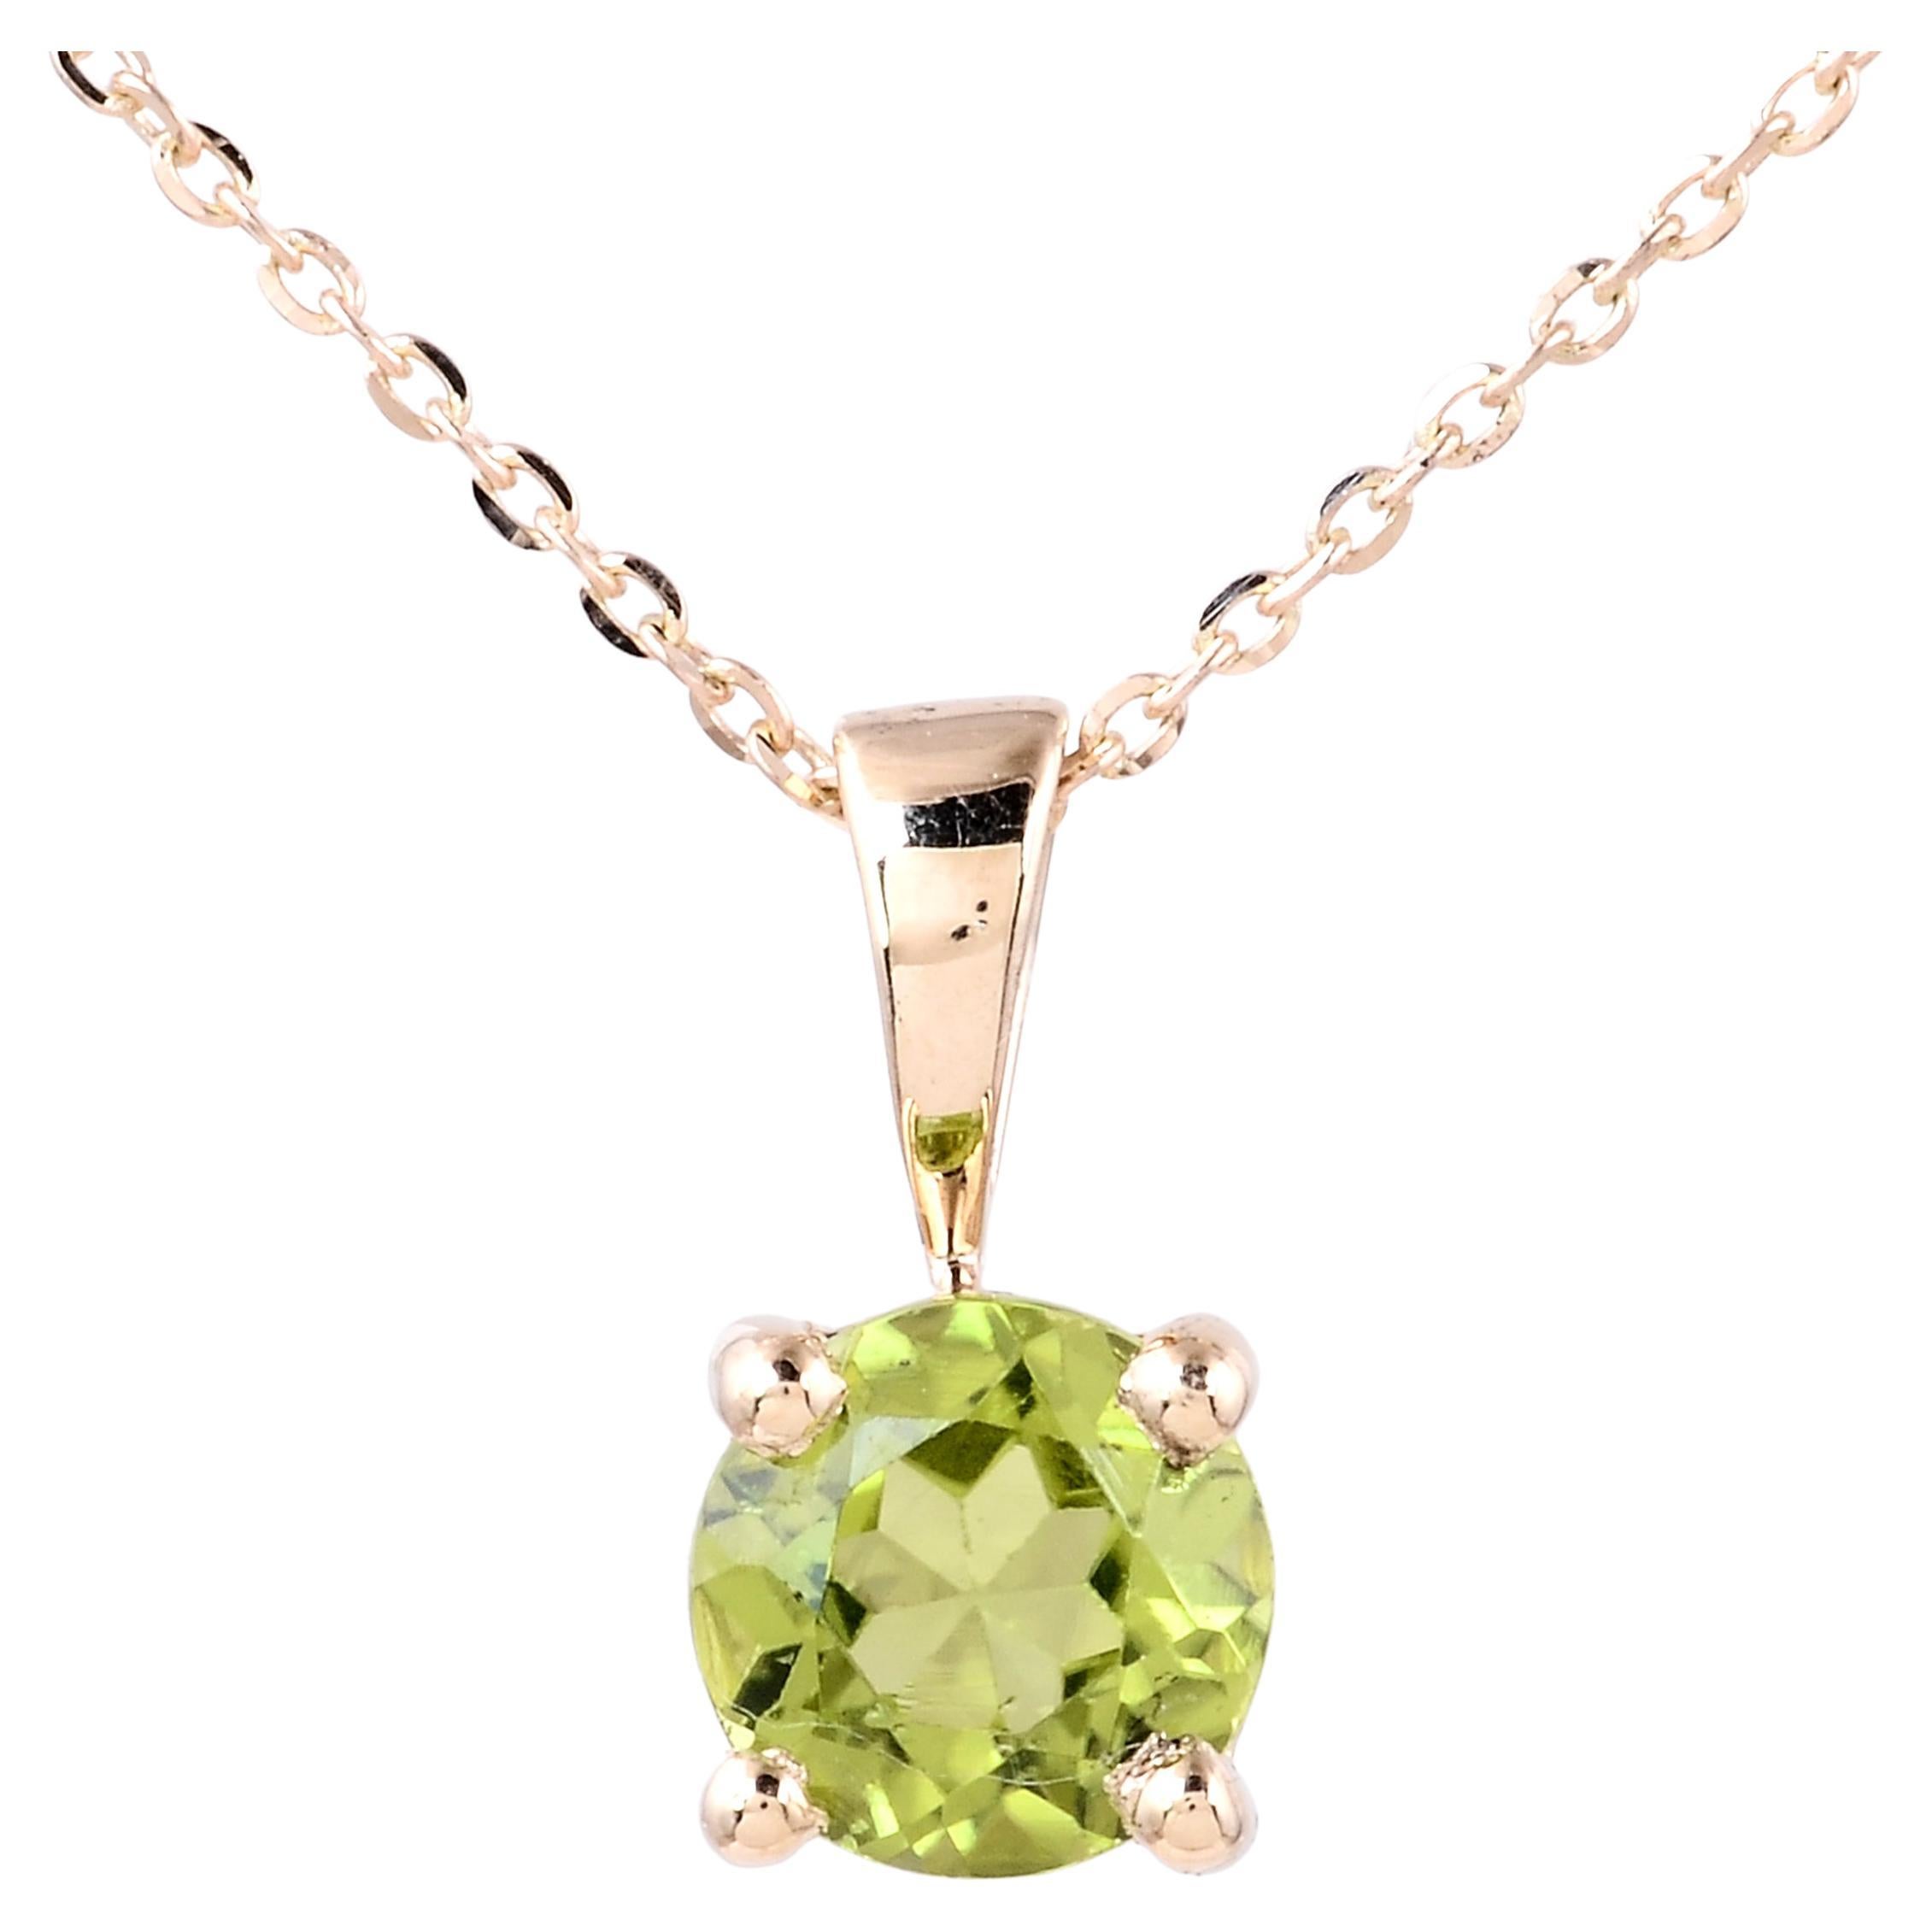 Luxury 14K Peridot Pendant Necklace - Exquisite Jewelry for Timeless Elegance